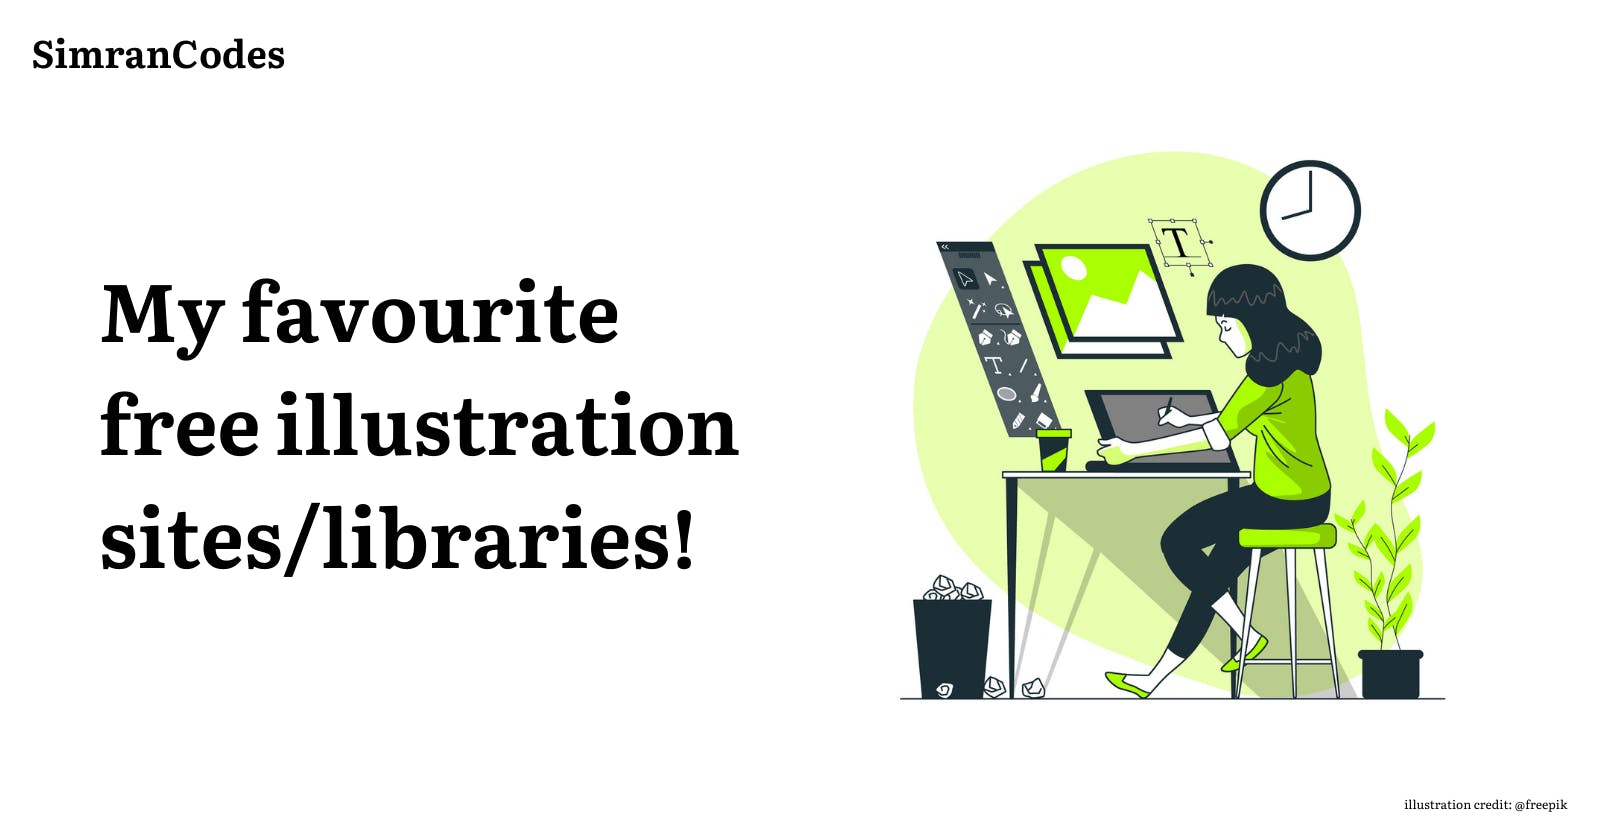 My favourite free illustration sites/libraries!